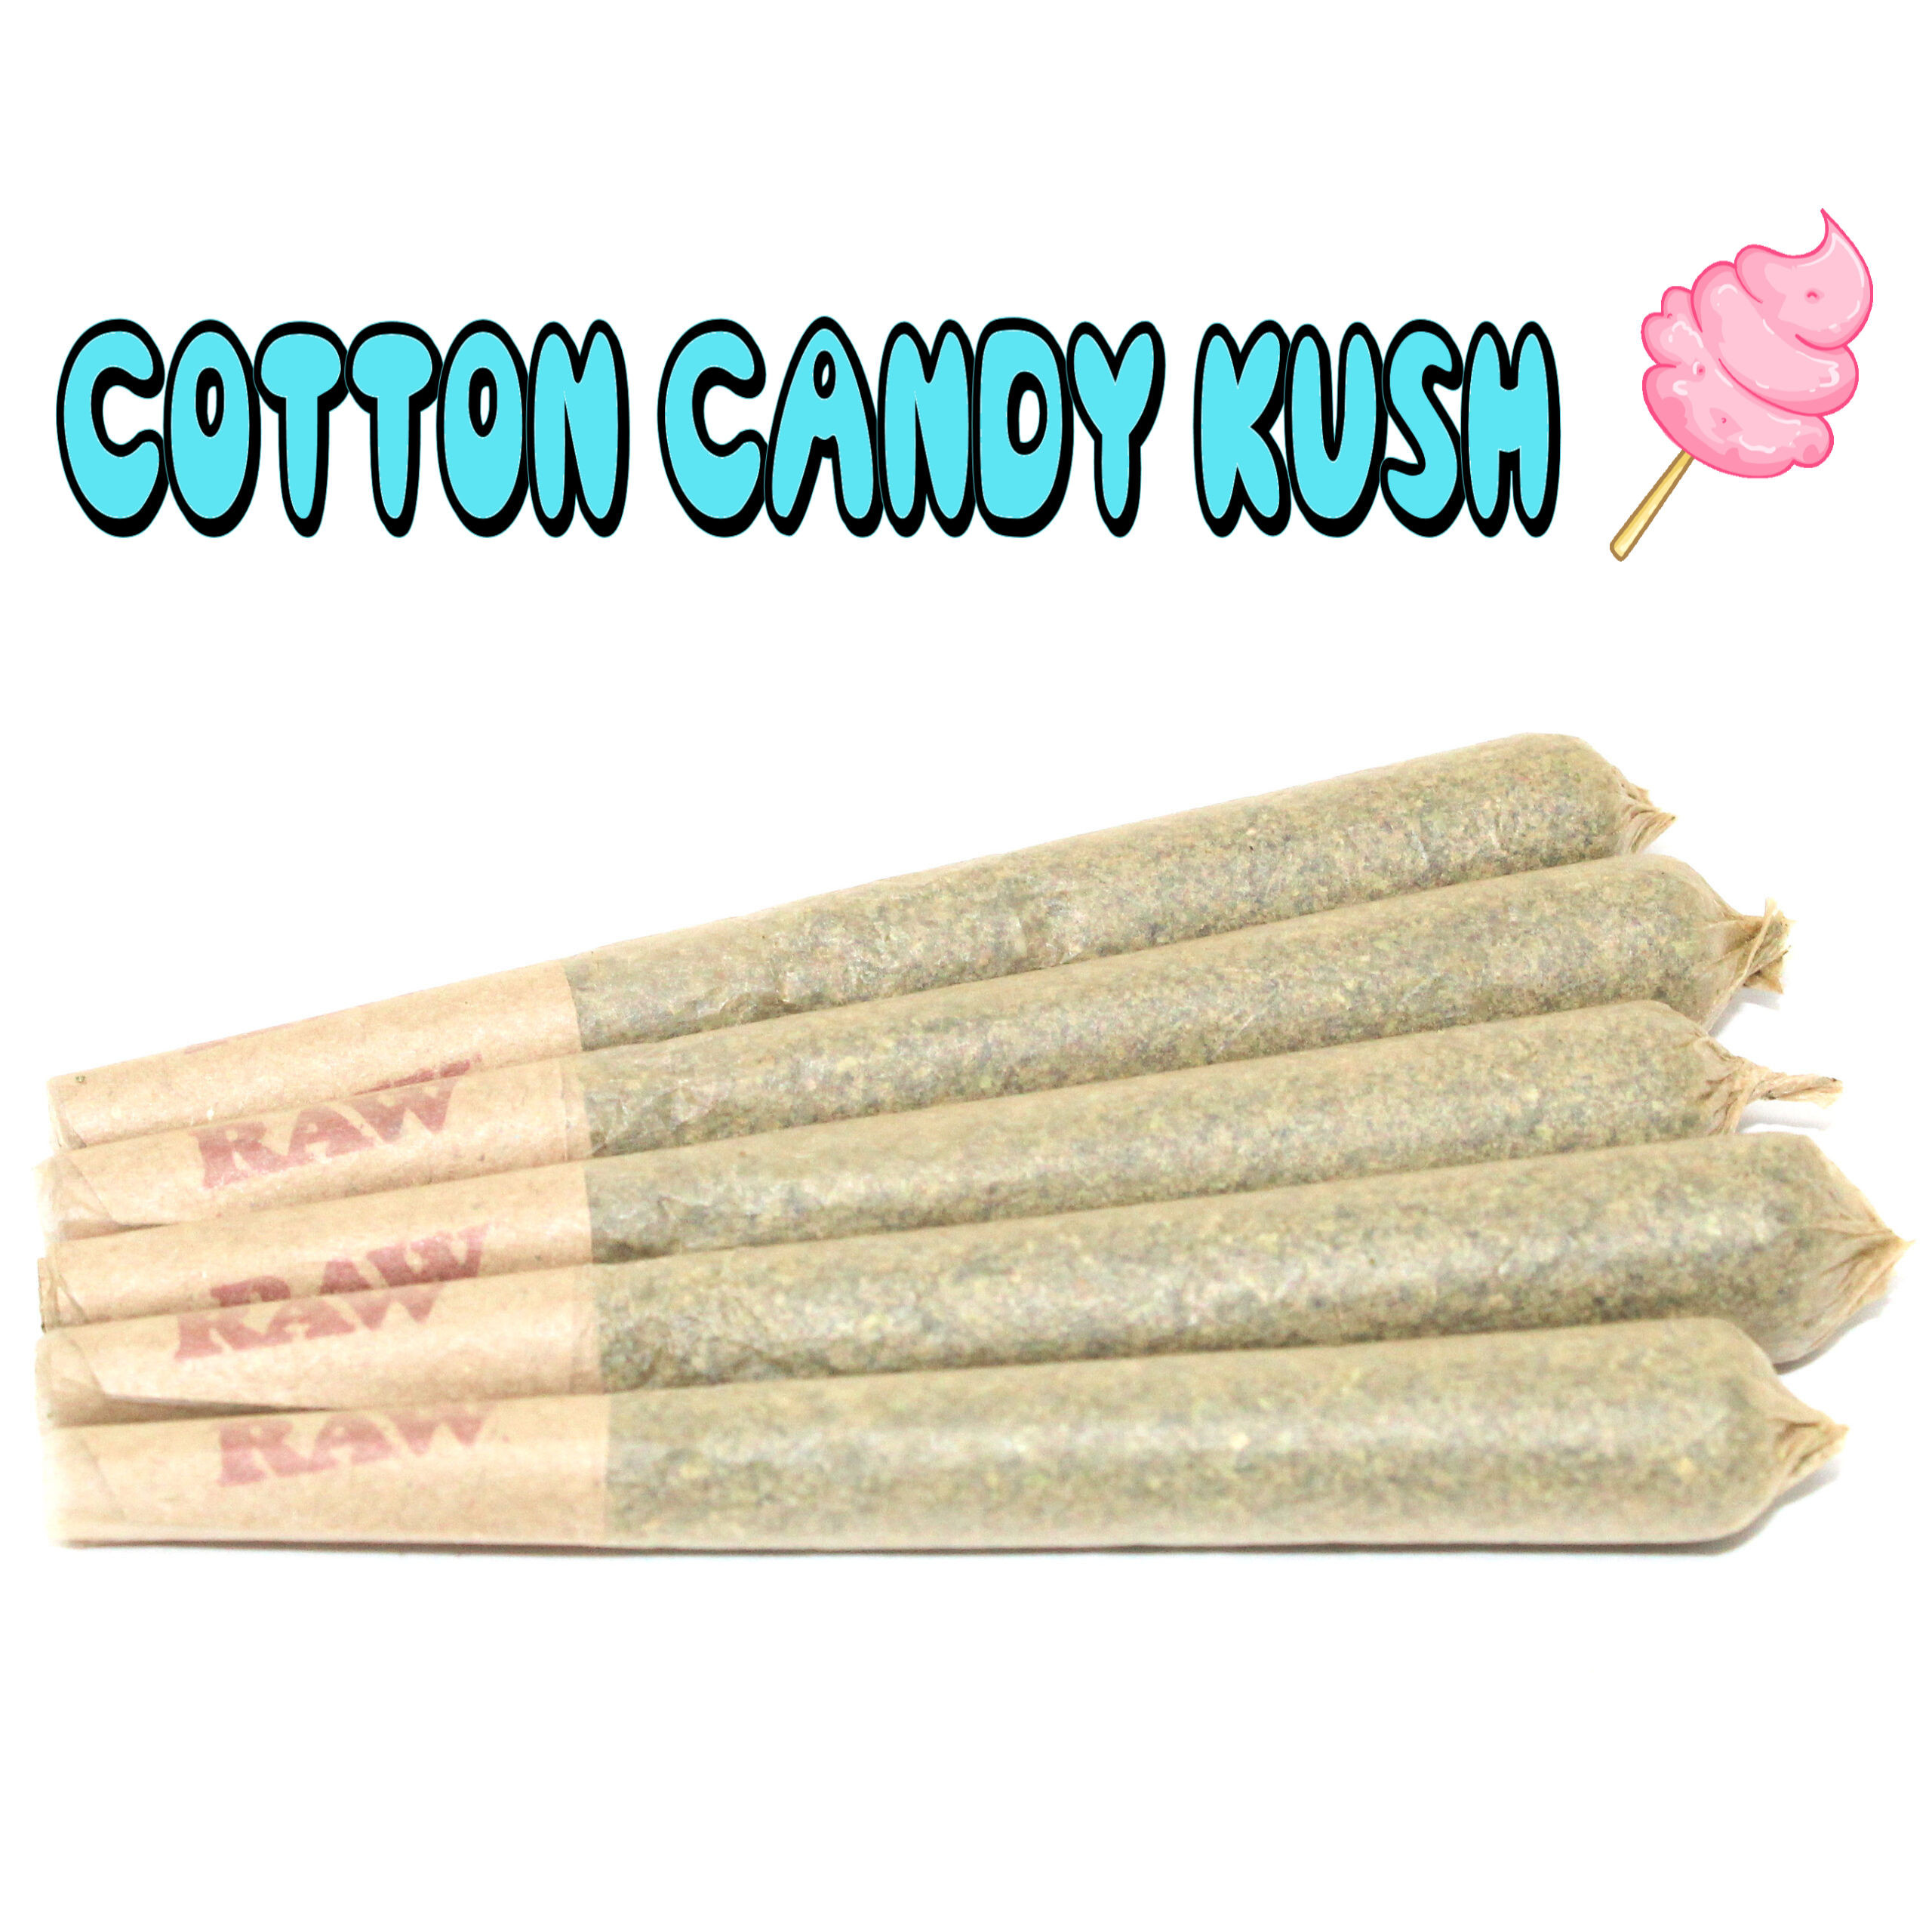 PRE-ROLLED JOINT - 'AAAA' COTTON CANDY KUSH (2G)